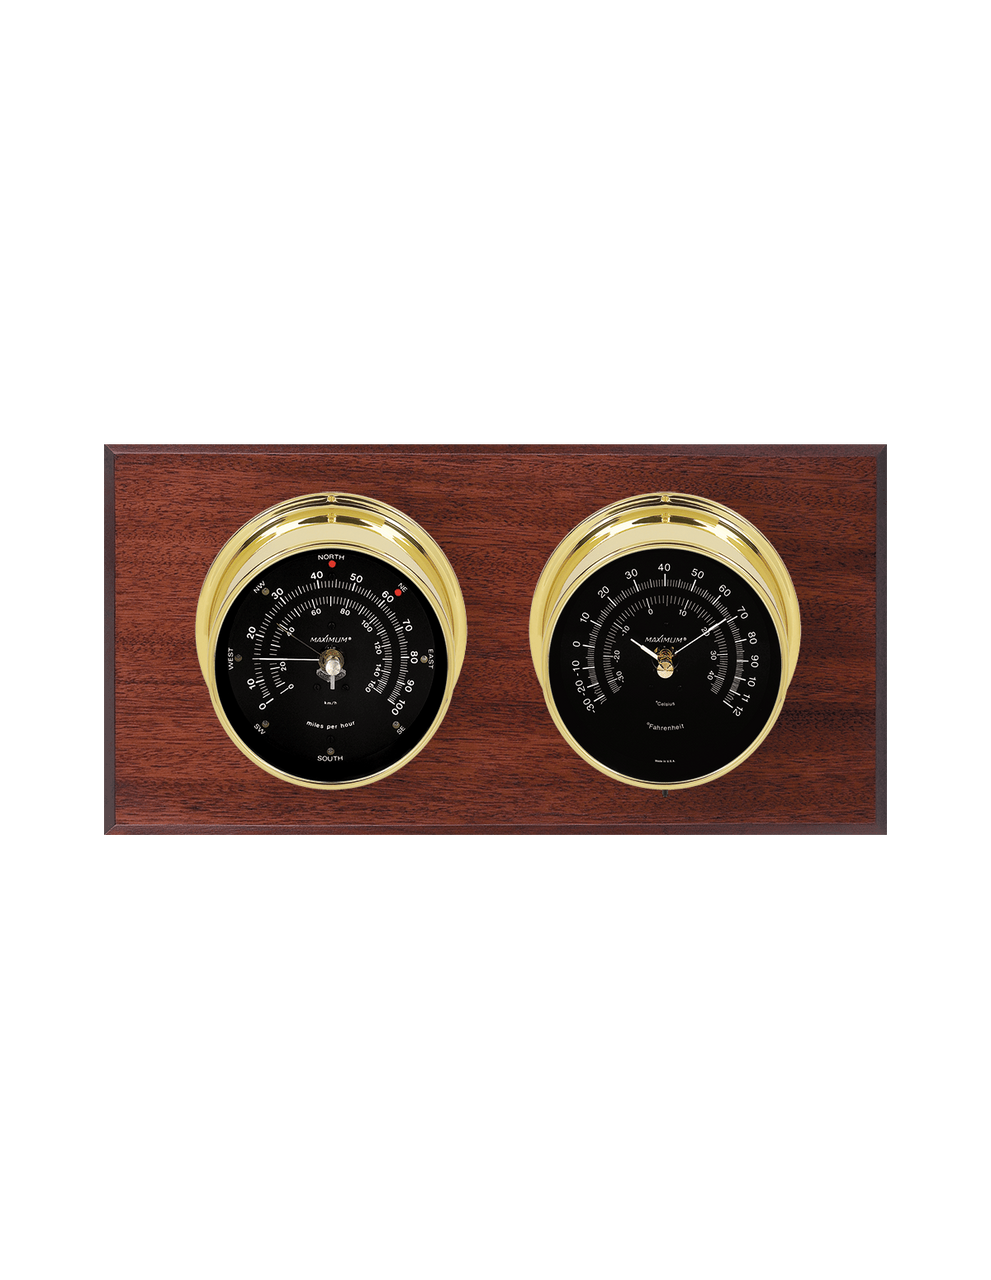 Catalina Wind and Temperature Weather Station - 2 Instruments - Polished Brass Cases  Mahogany Wood - Black Face - Reads 0-100 mph